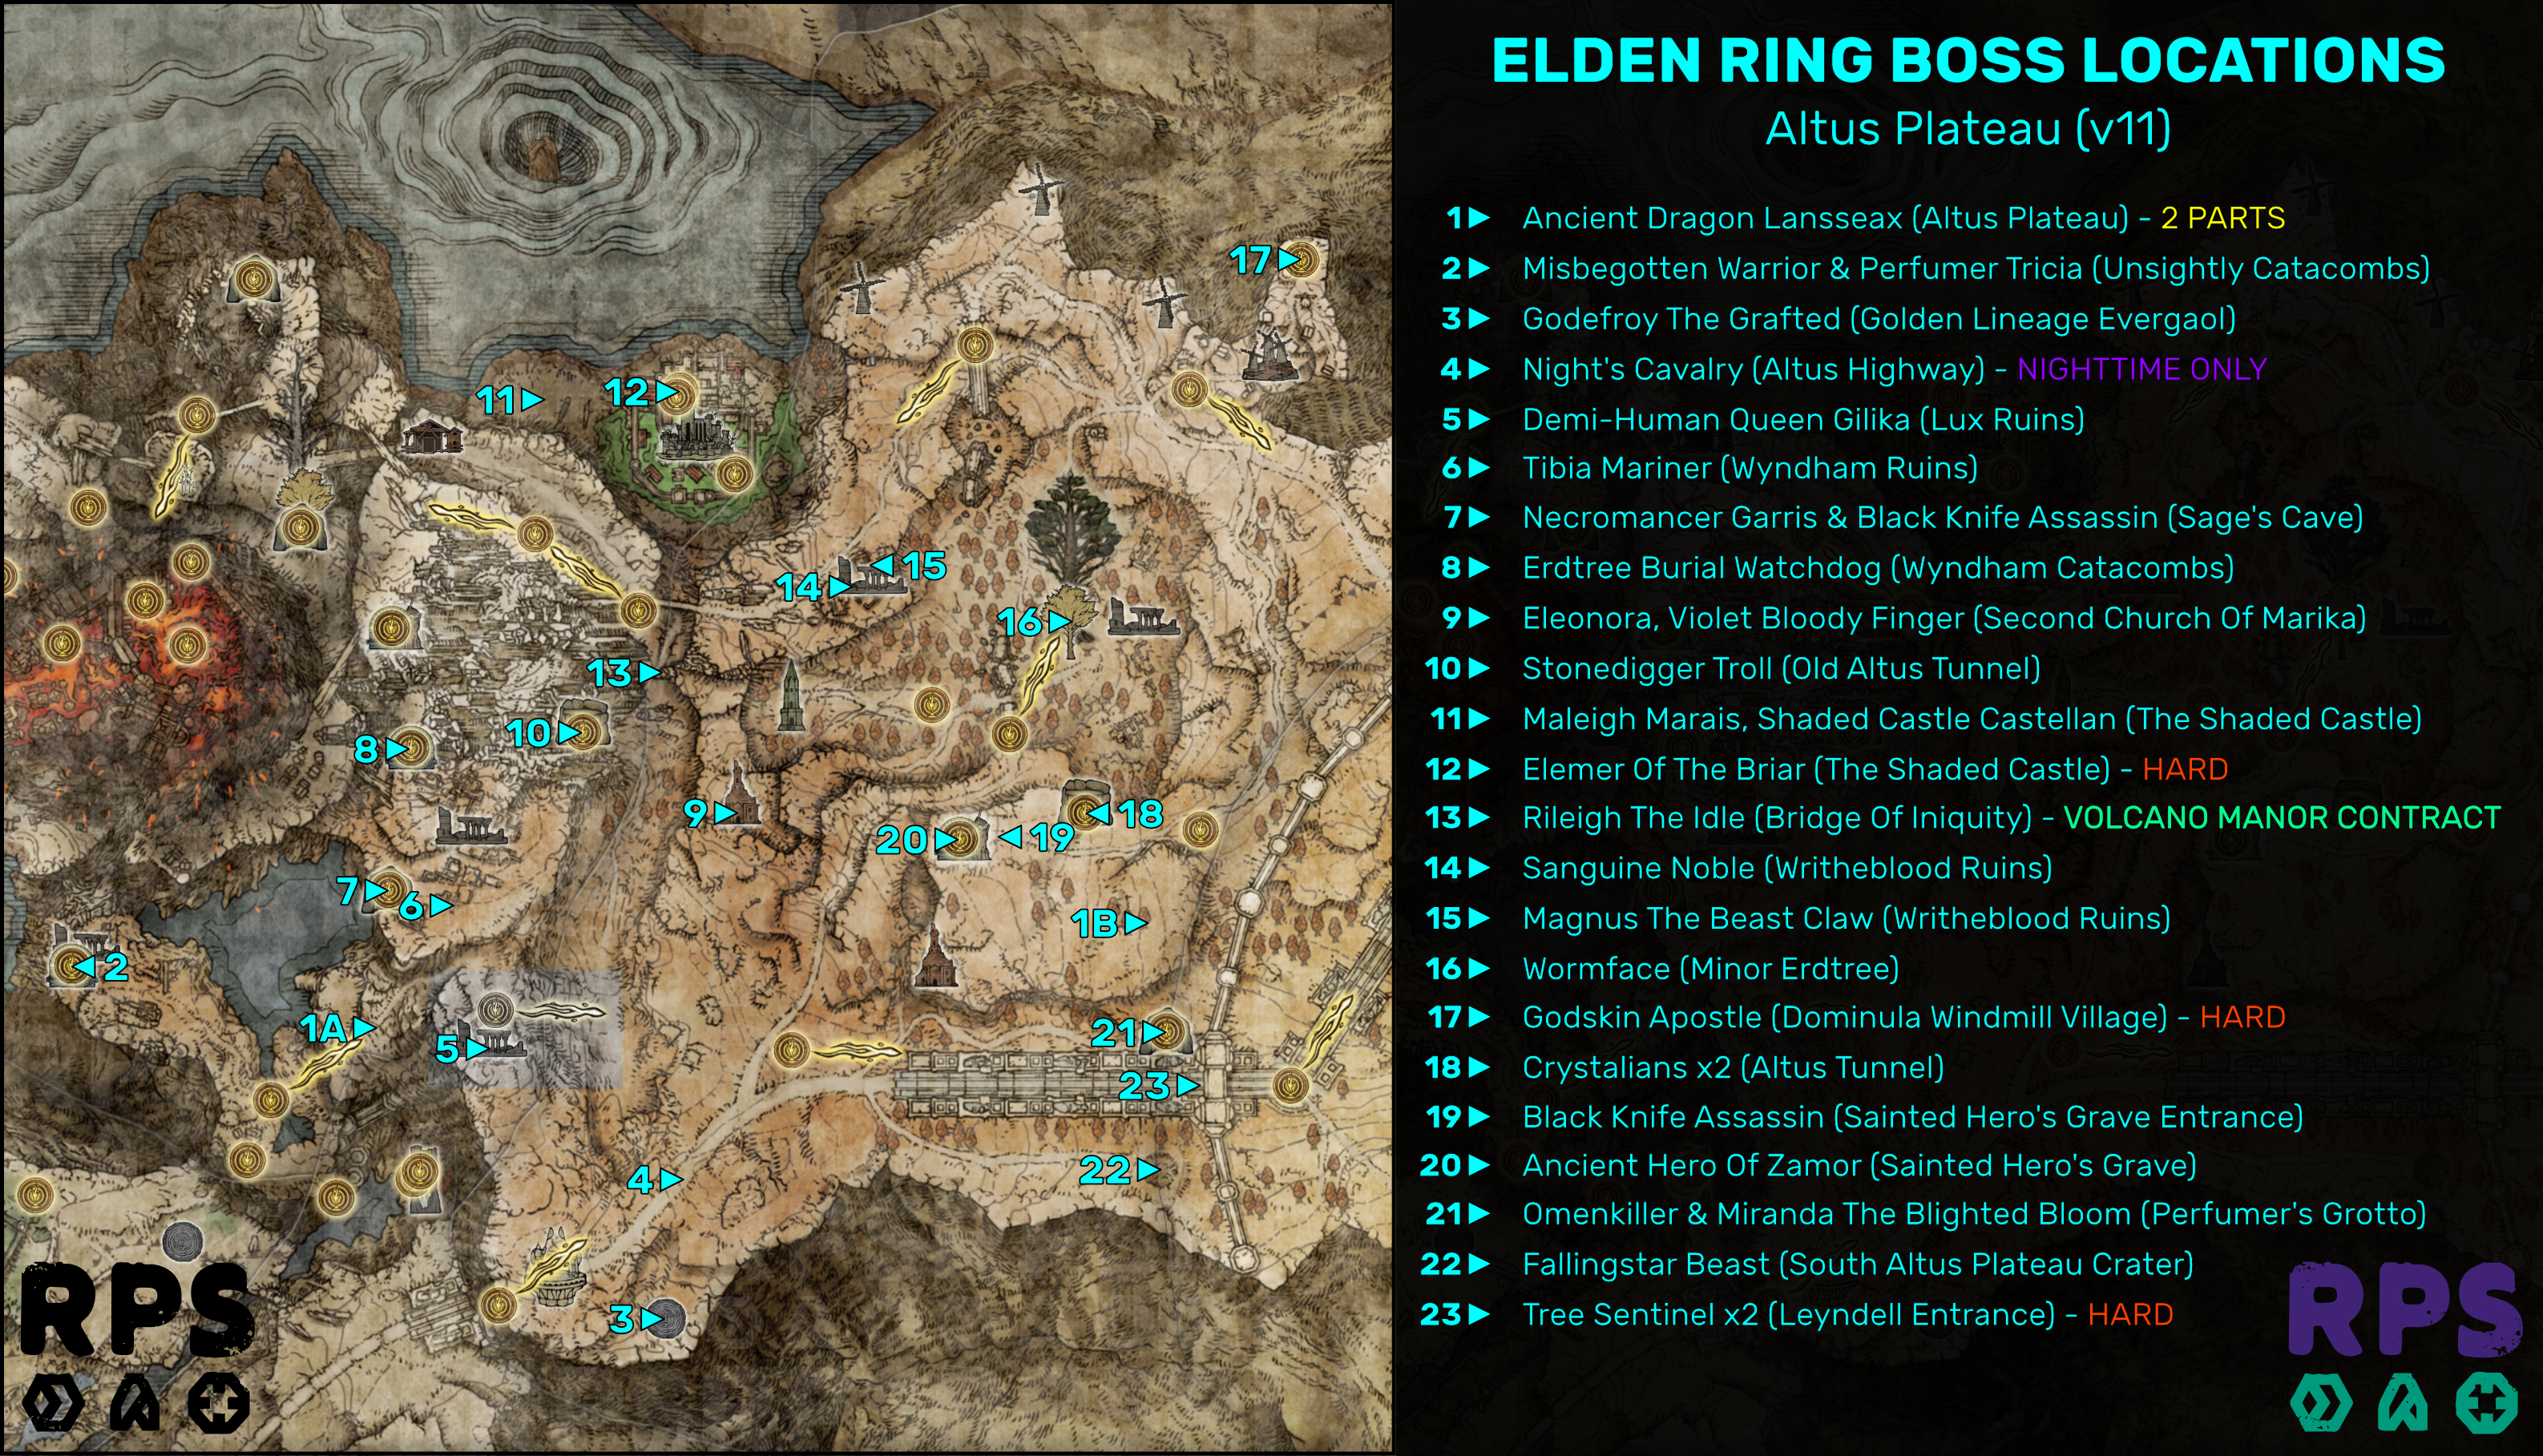 Elden Ring: The Best Bosses and How to Beat Them